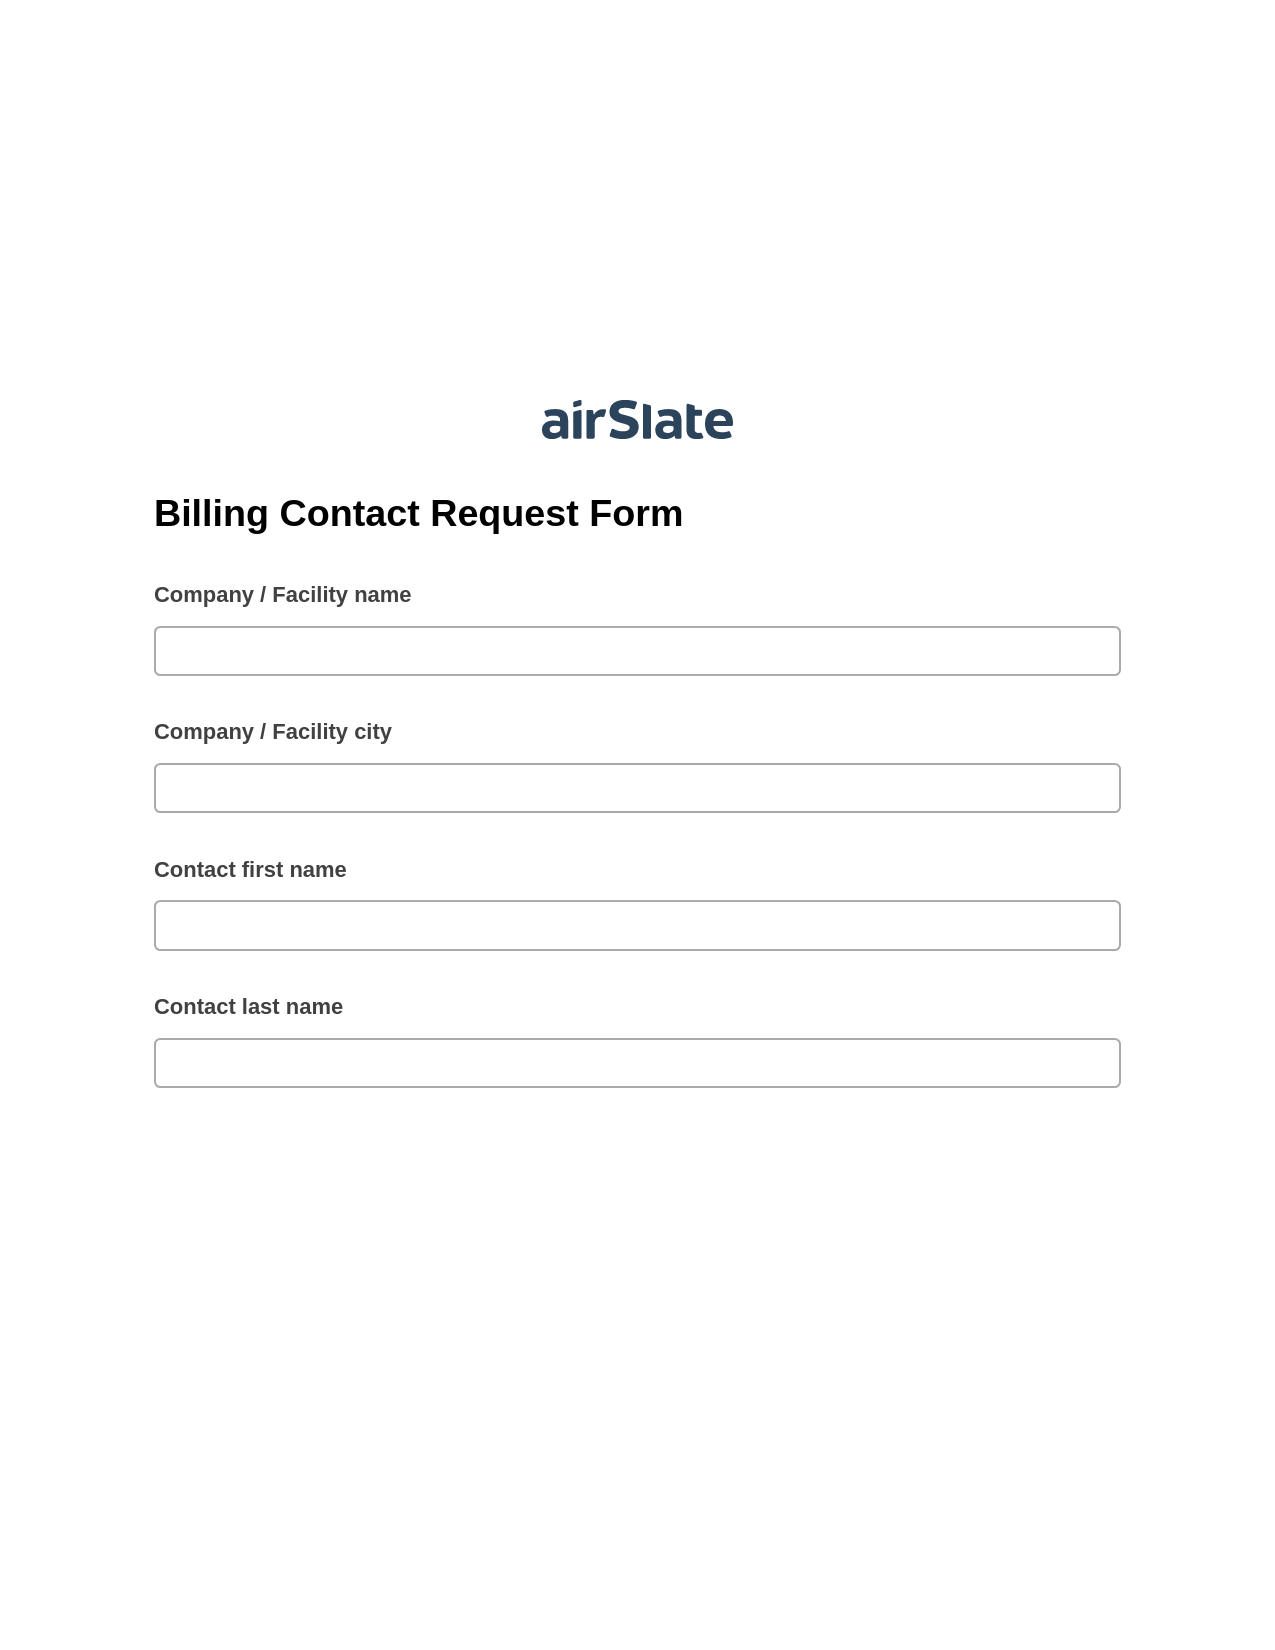 Billing Contact Request Form Pre-fill from CSV File Bot, Audit Trail Bot, Export to NetSuite Record Bot